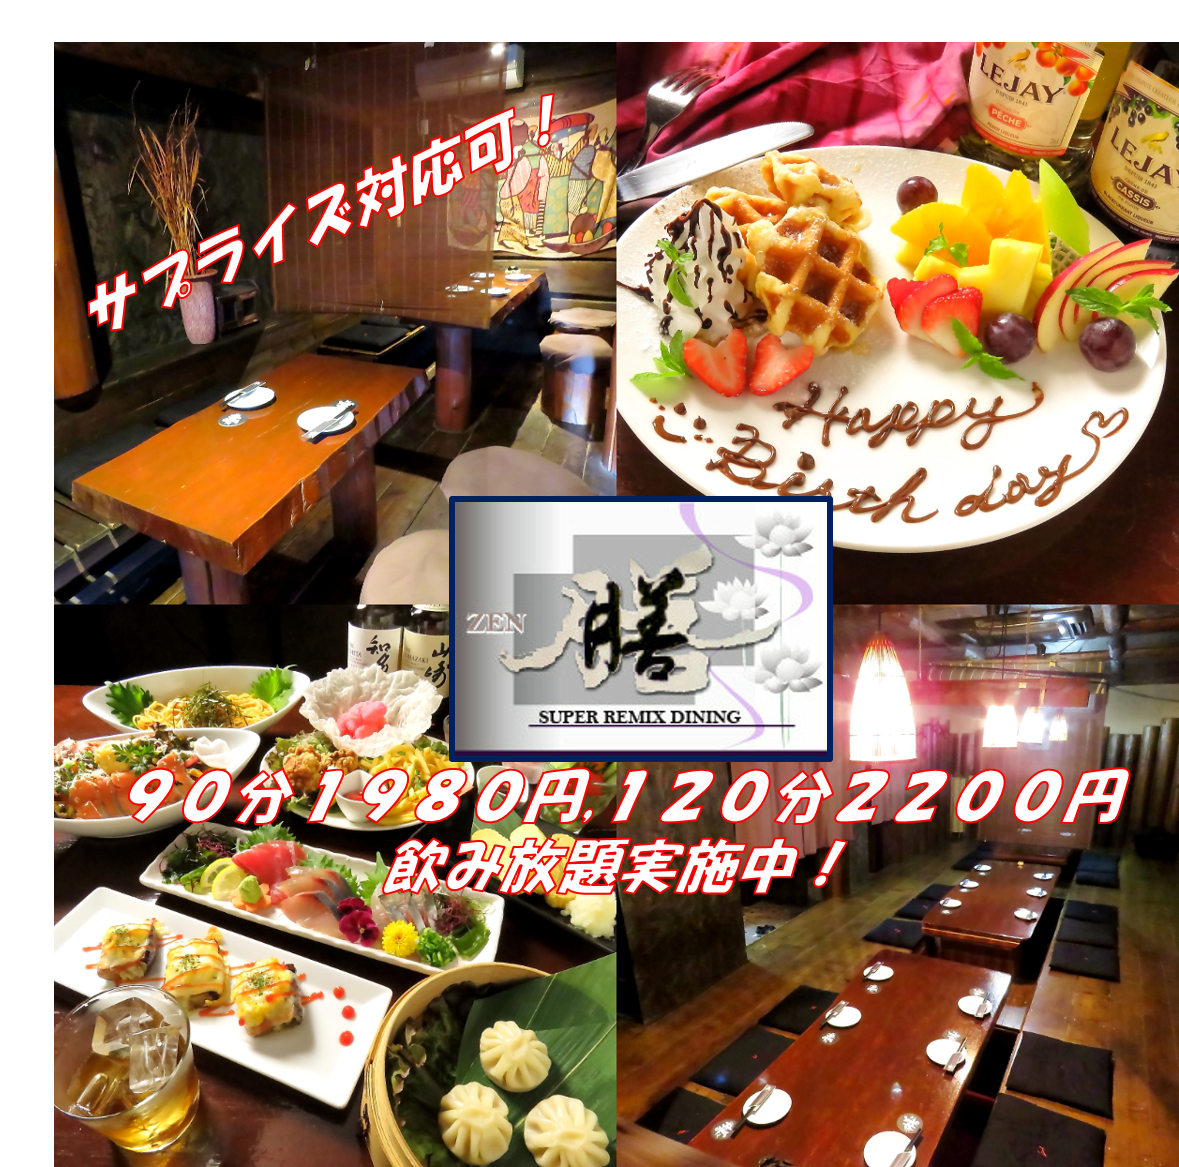 All-you-can-drink is OK on the day! Fashionable dining where you can enjoy various dishes regardless of genre ♪